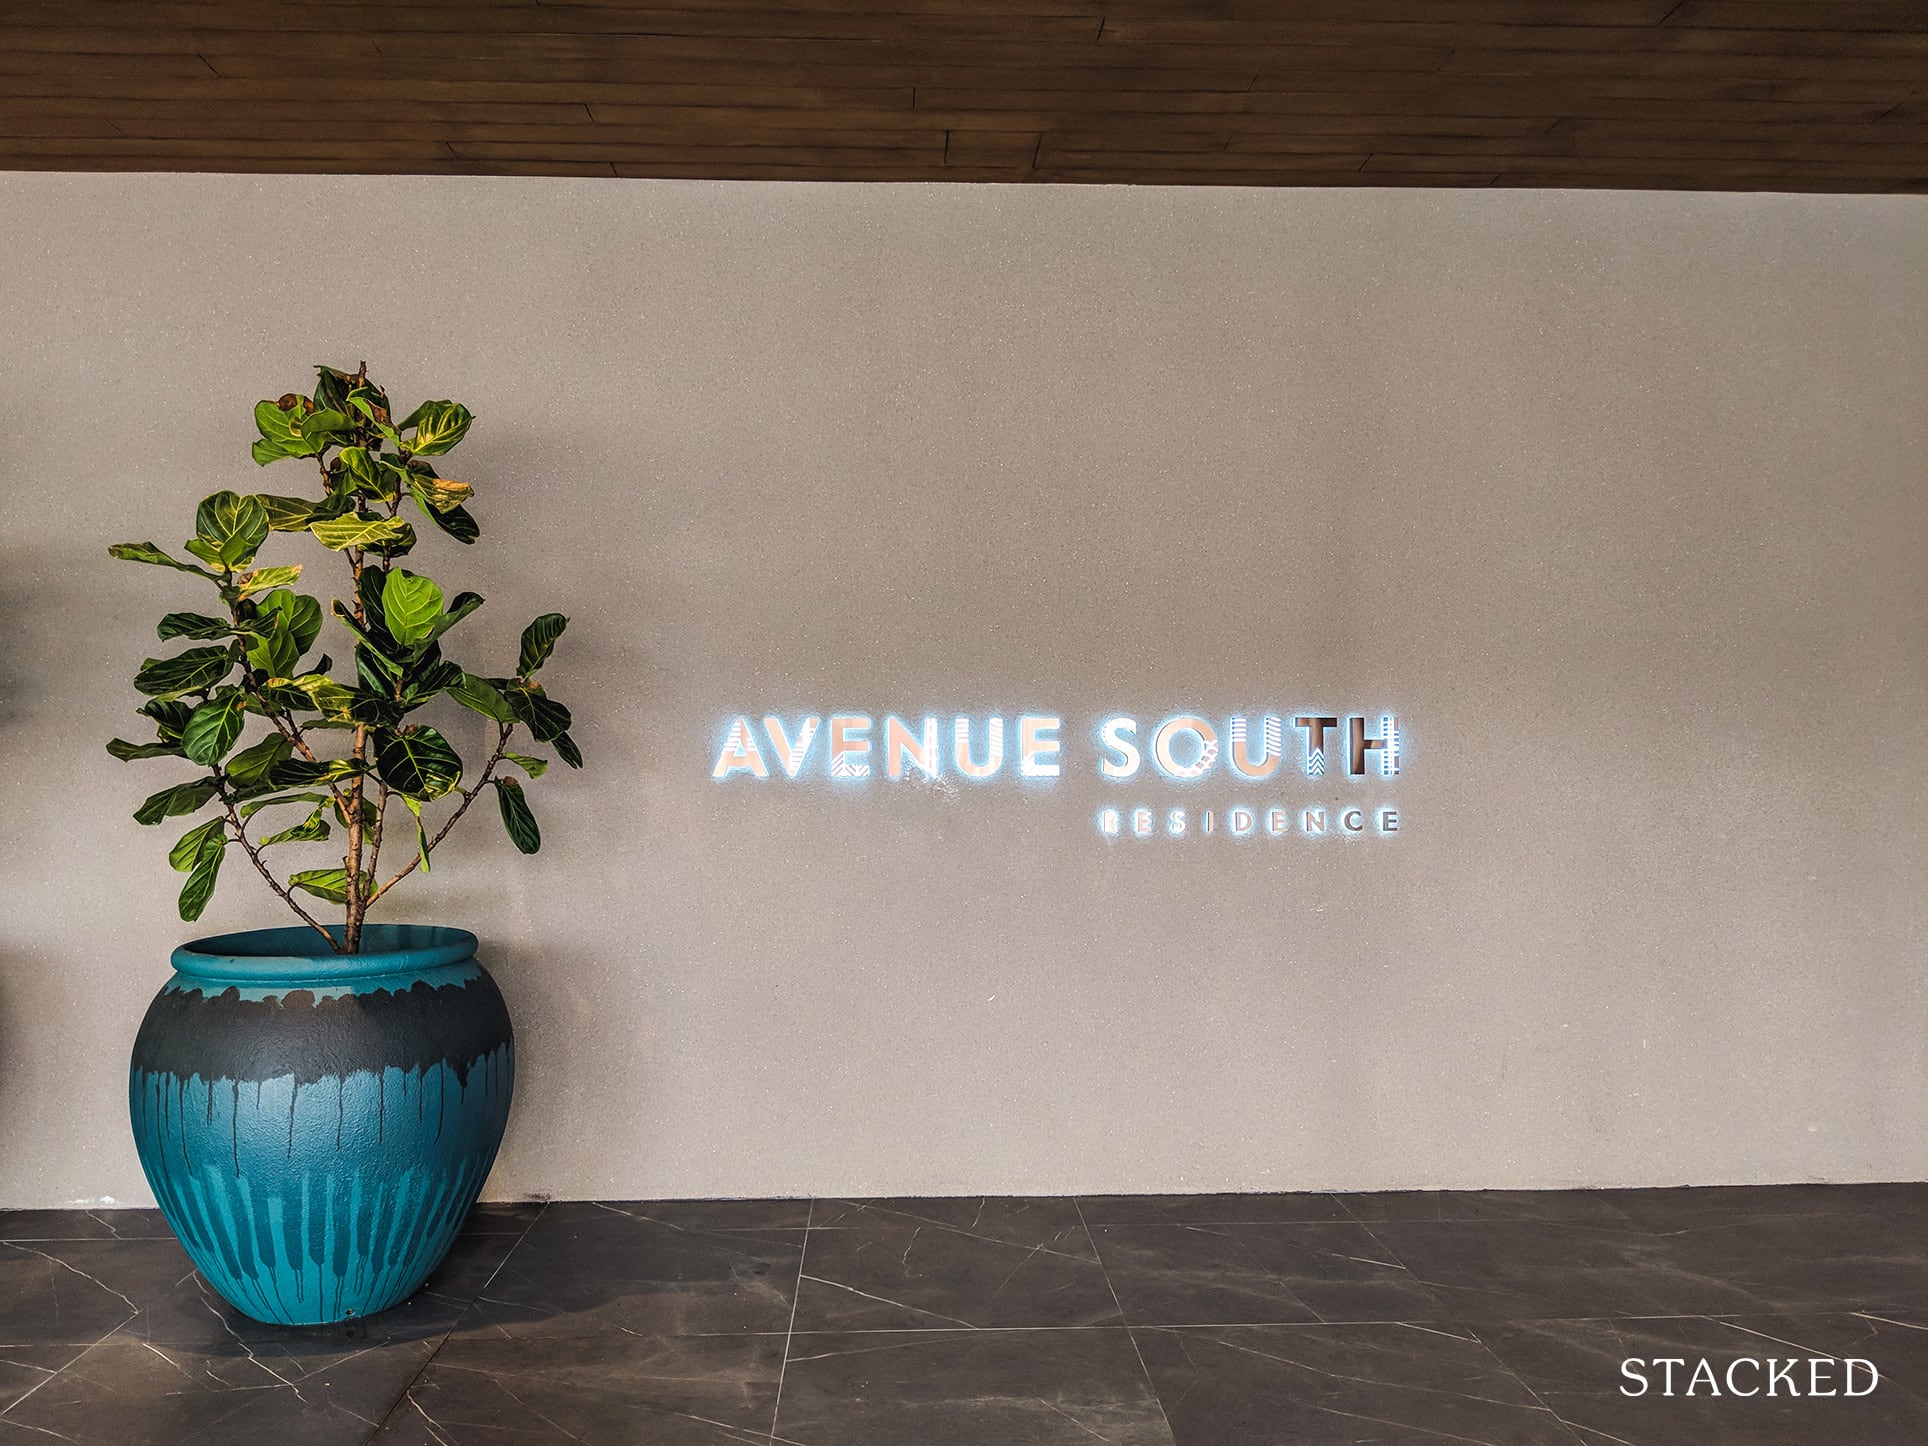 Avenue South Residence showflat